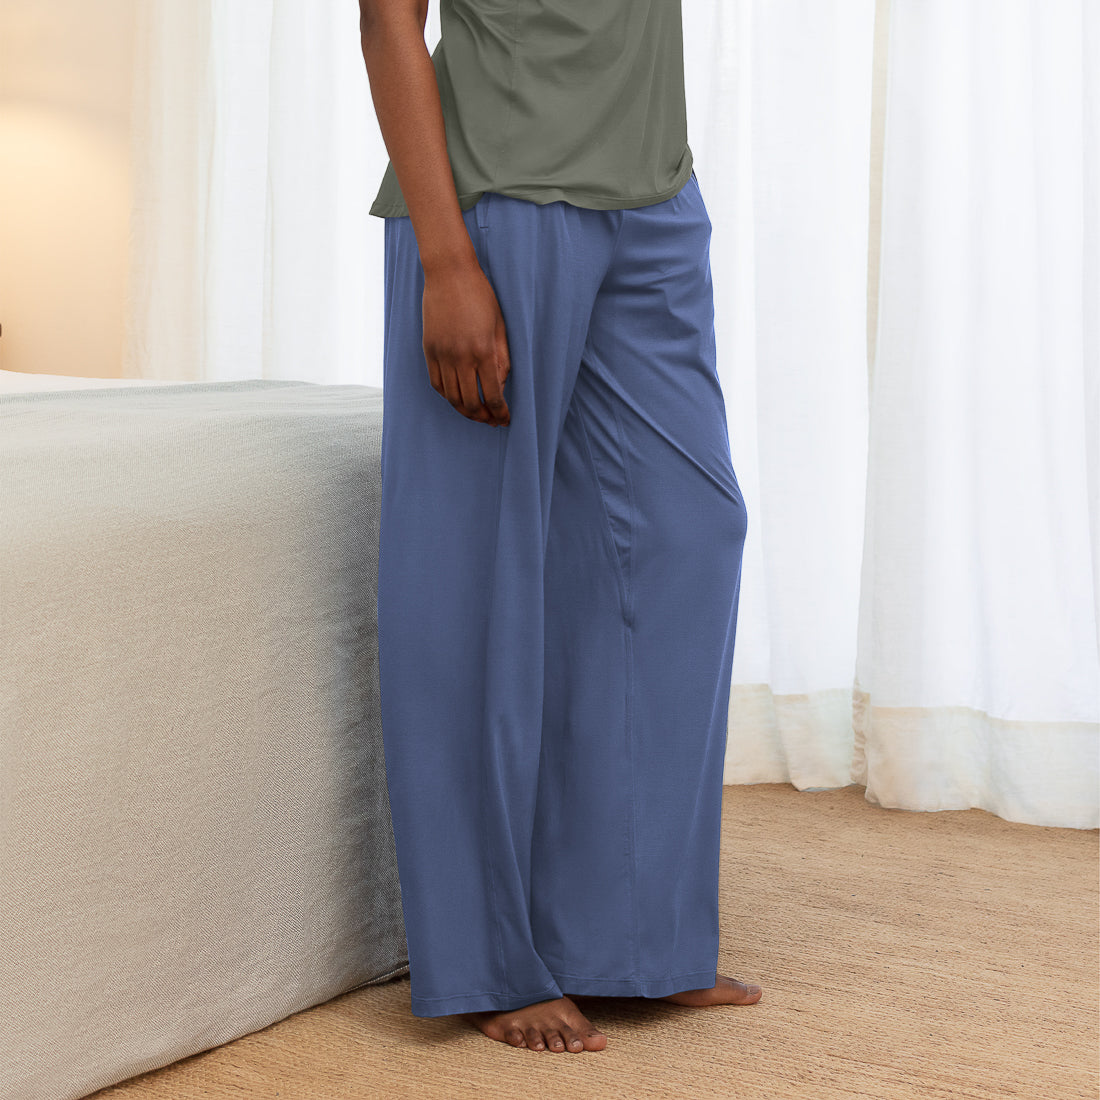 Women's Pajama pants are a perfect lounge comfortable casual wear